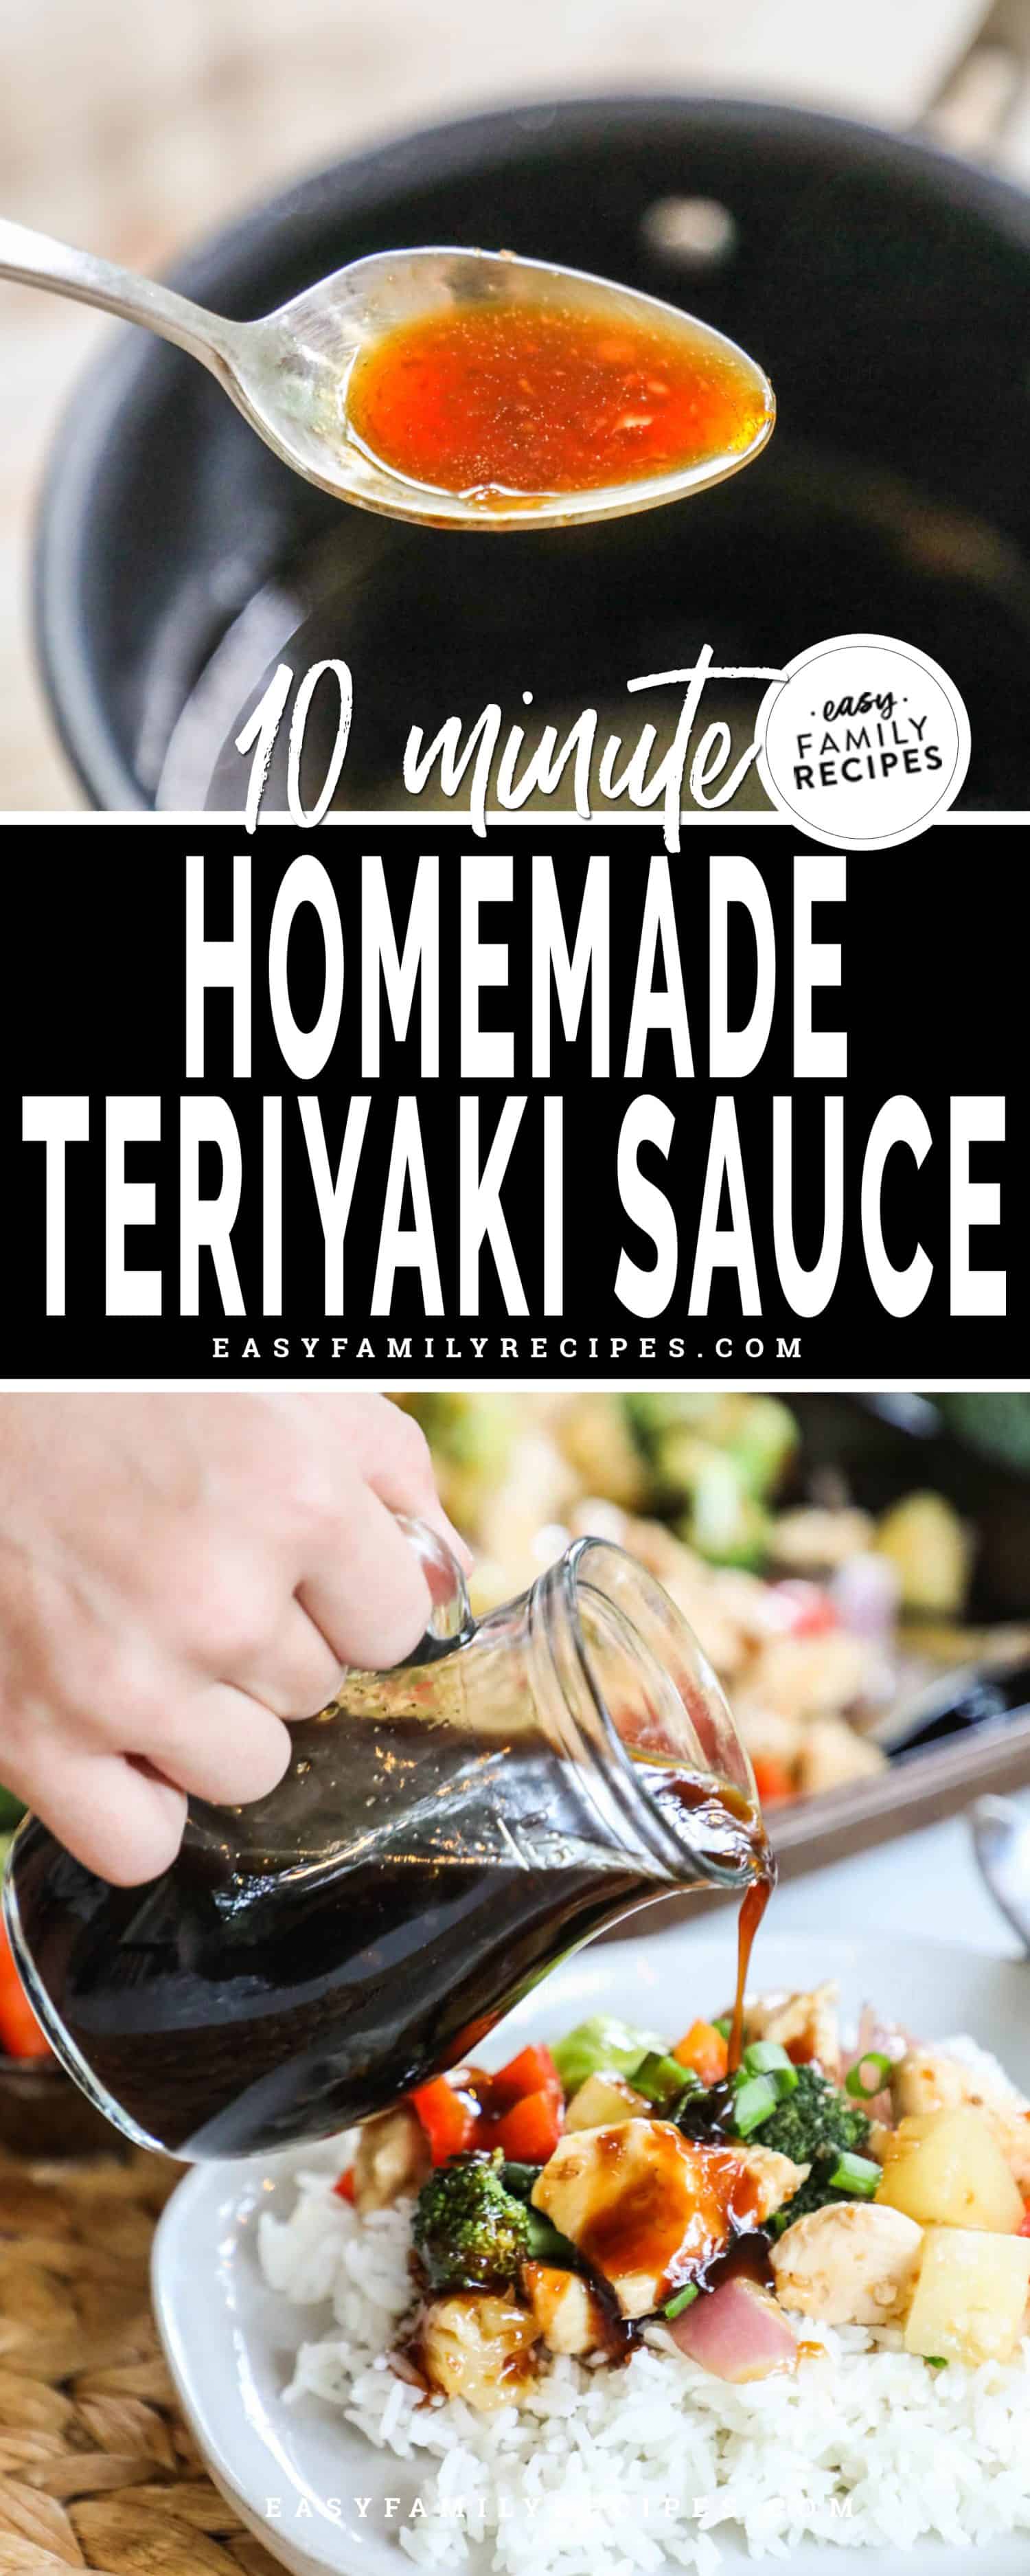 2 image collage of teriyaki sauce recipe homemade and then being served over dinner plate.